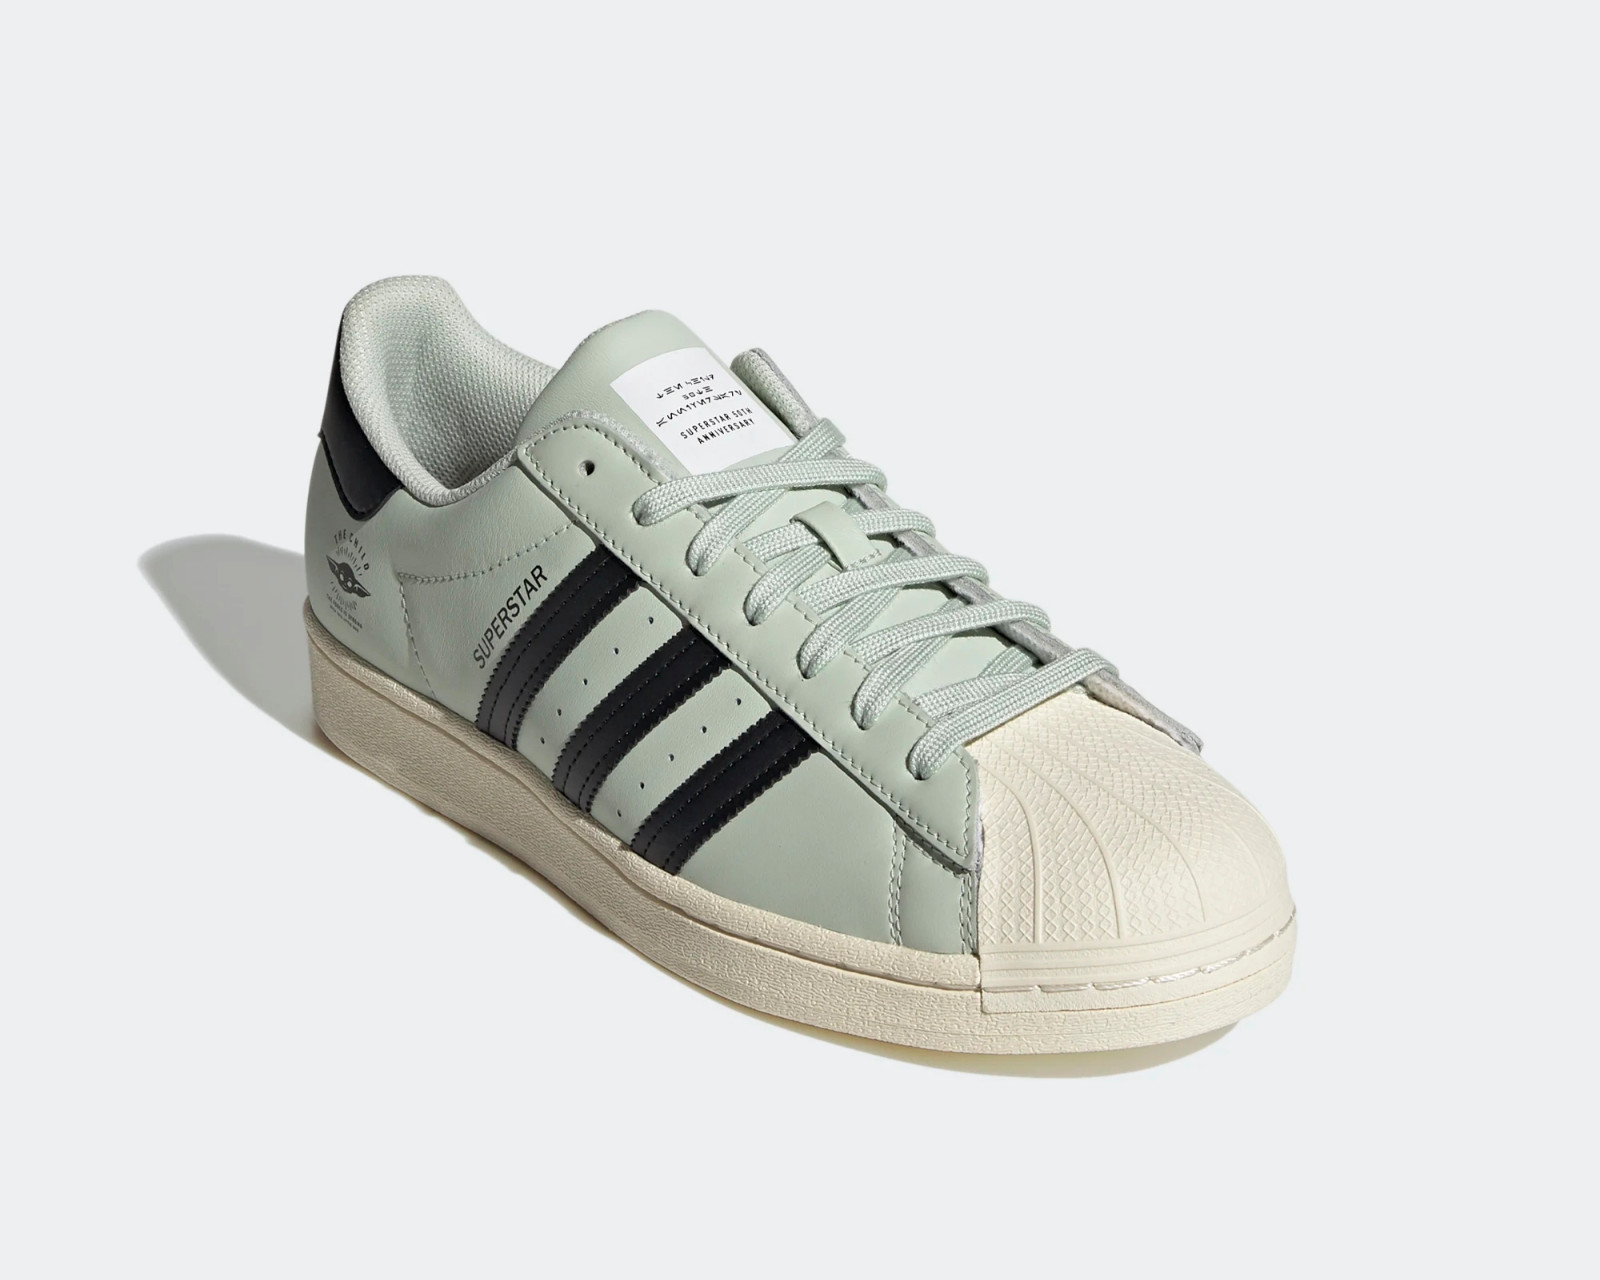 Star Wars x Adidas Superstar The Child Shoes Linen Green Core Black ...